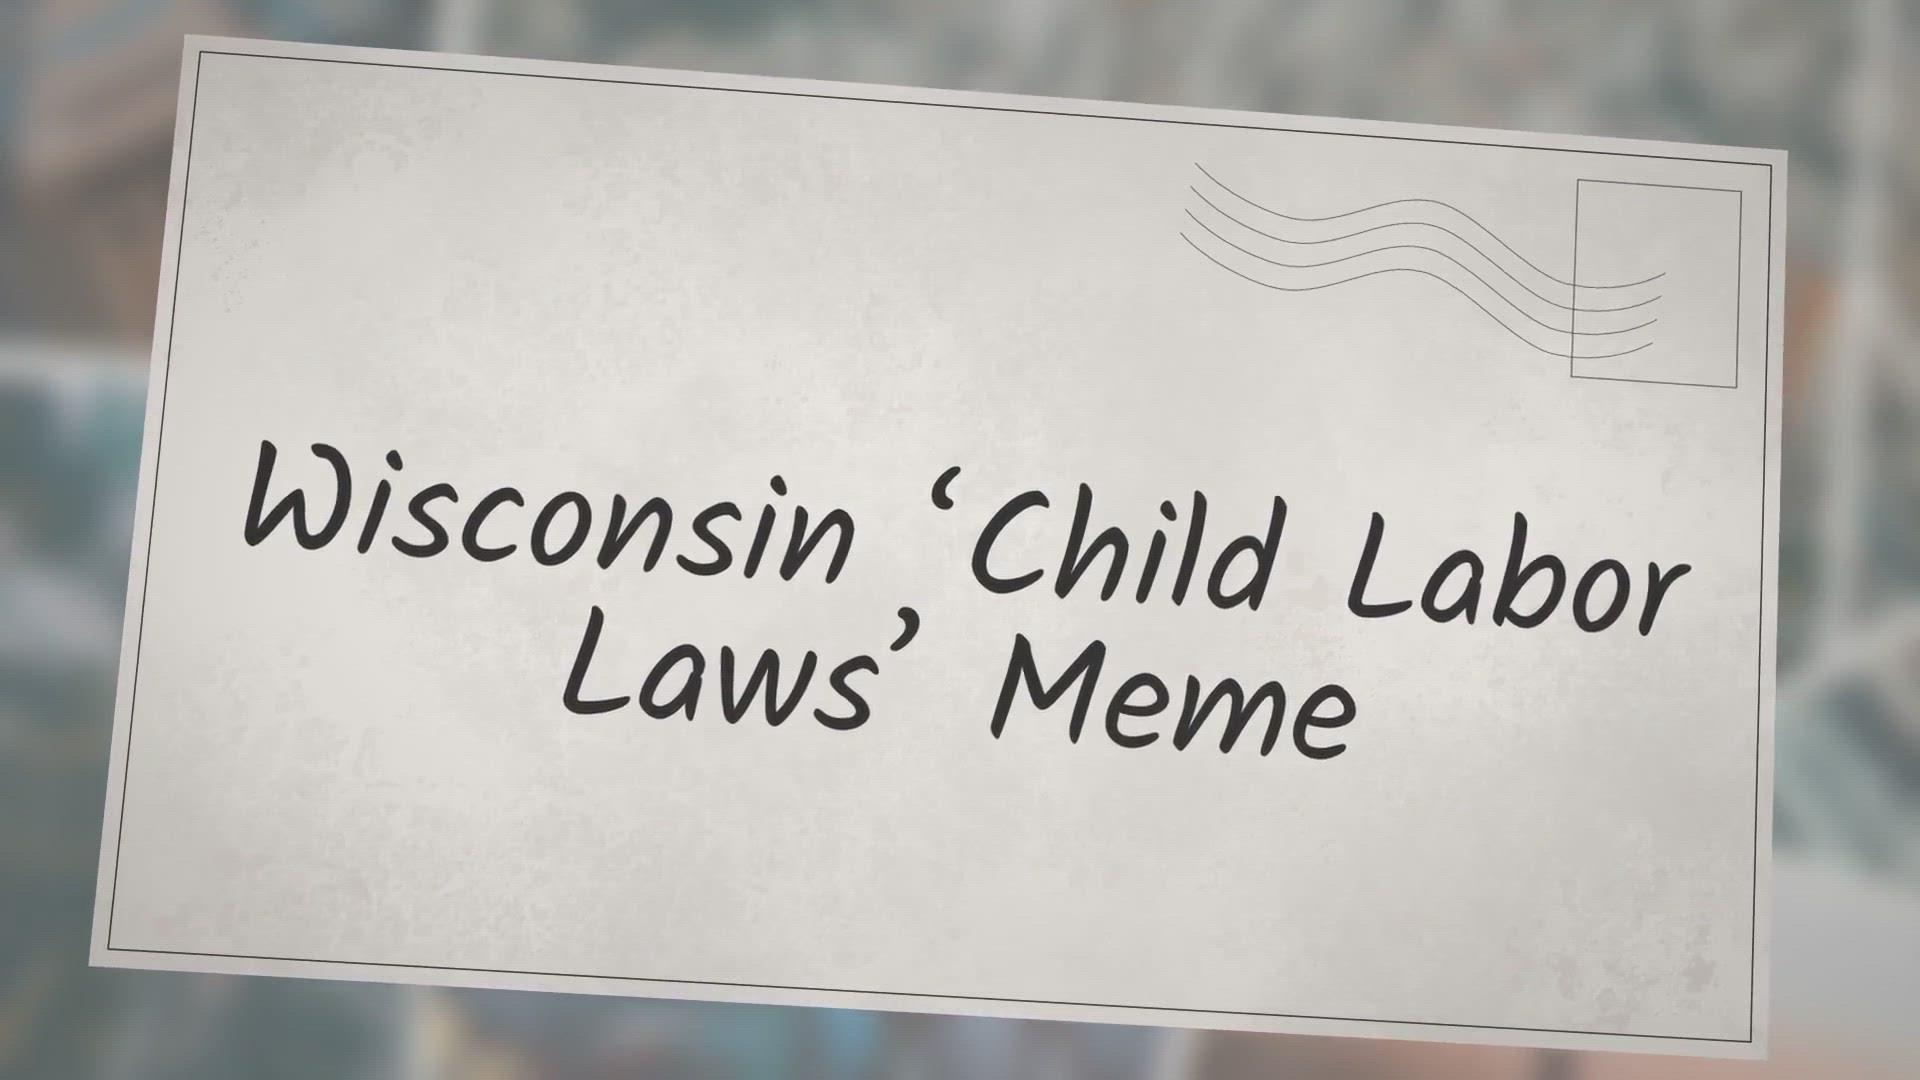 'Video thumbnail for Wisconsin ‘Child Labor Laws’ Meme'